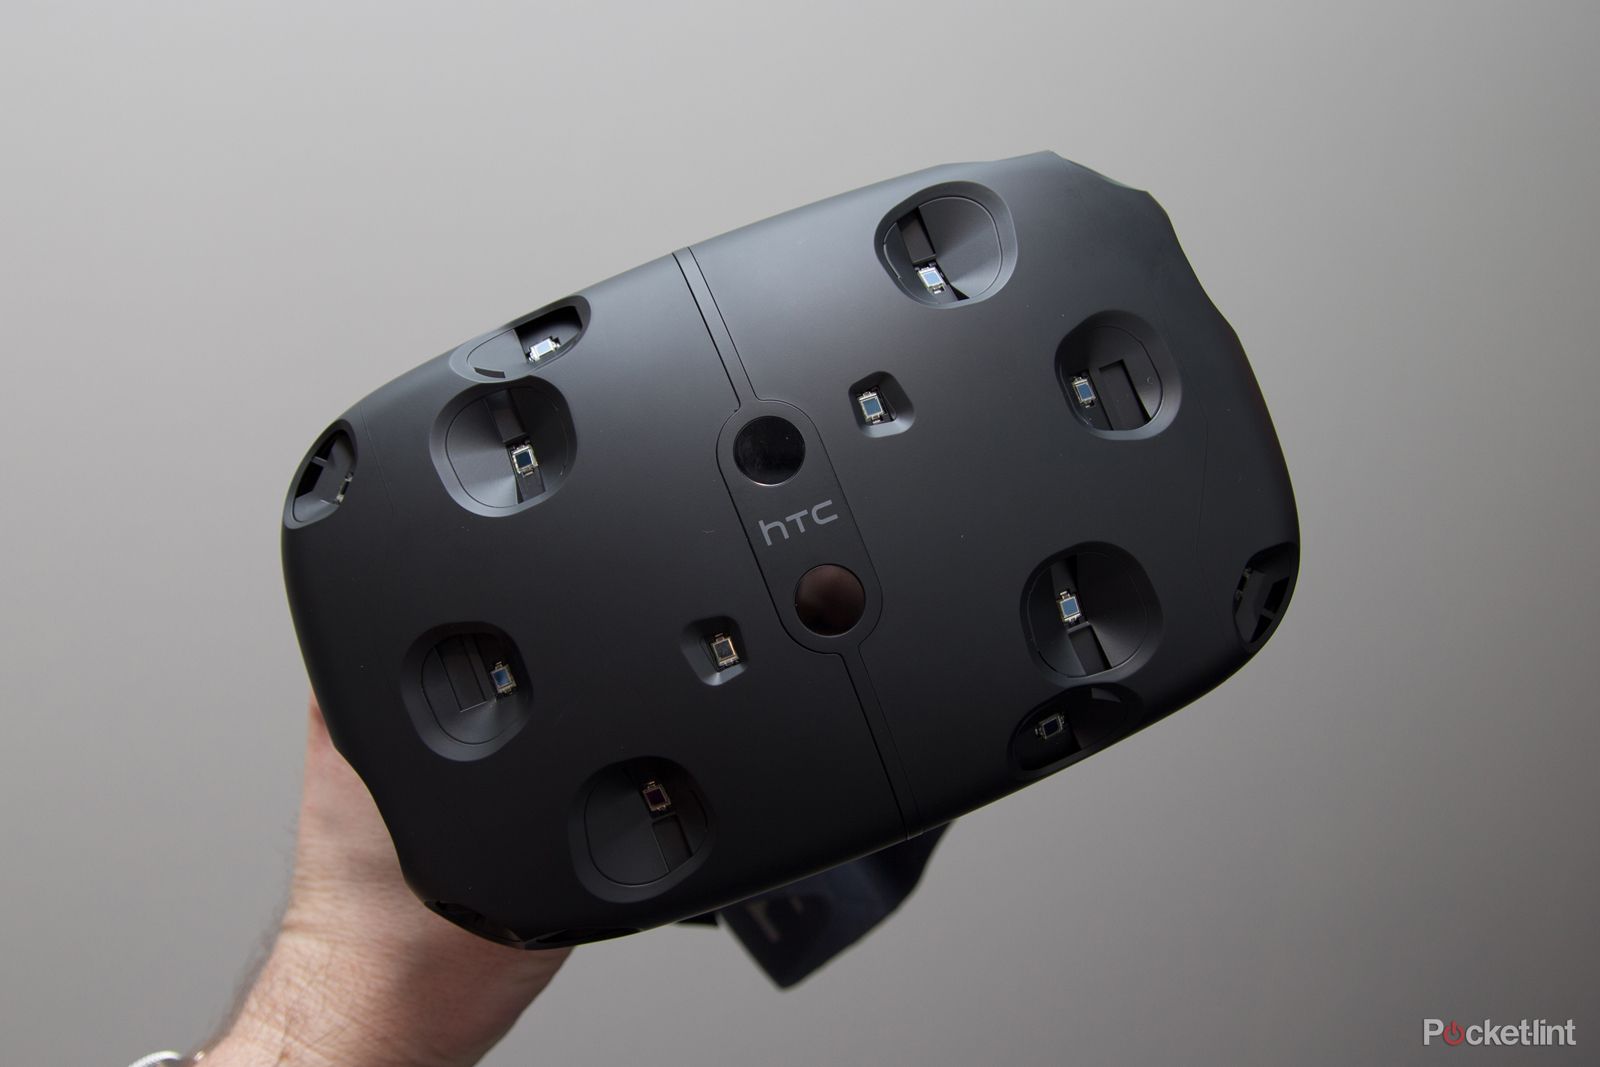 htc will start selling the vive vr headset to consumers in april image 1